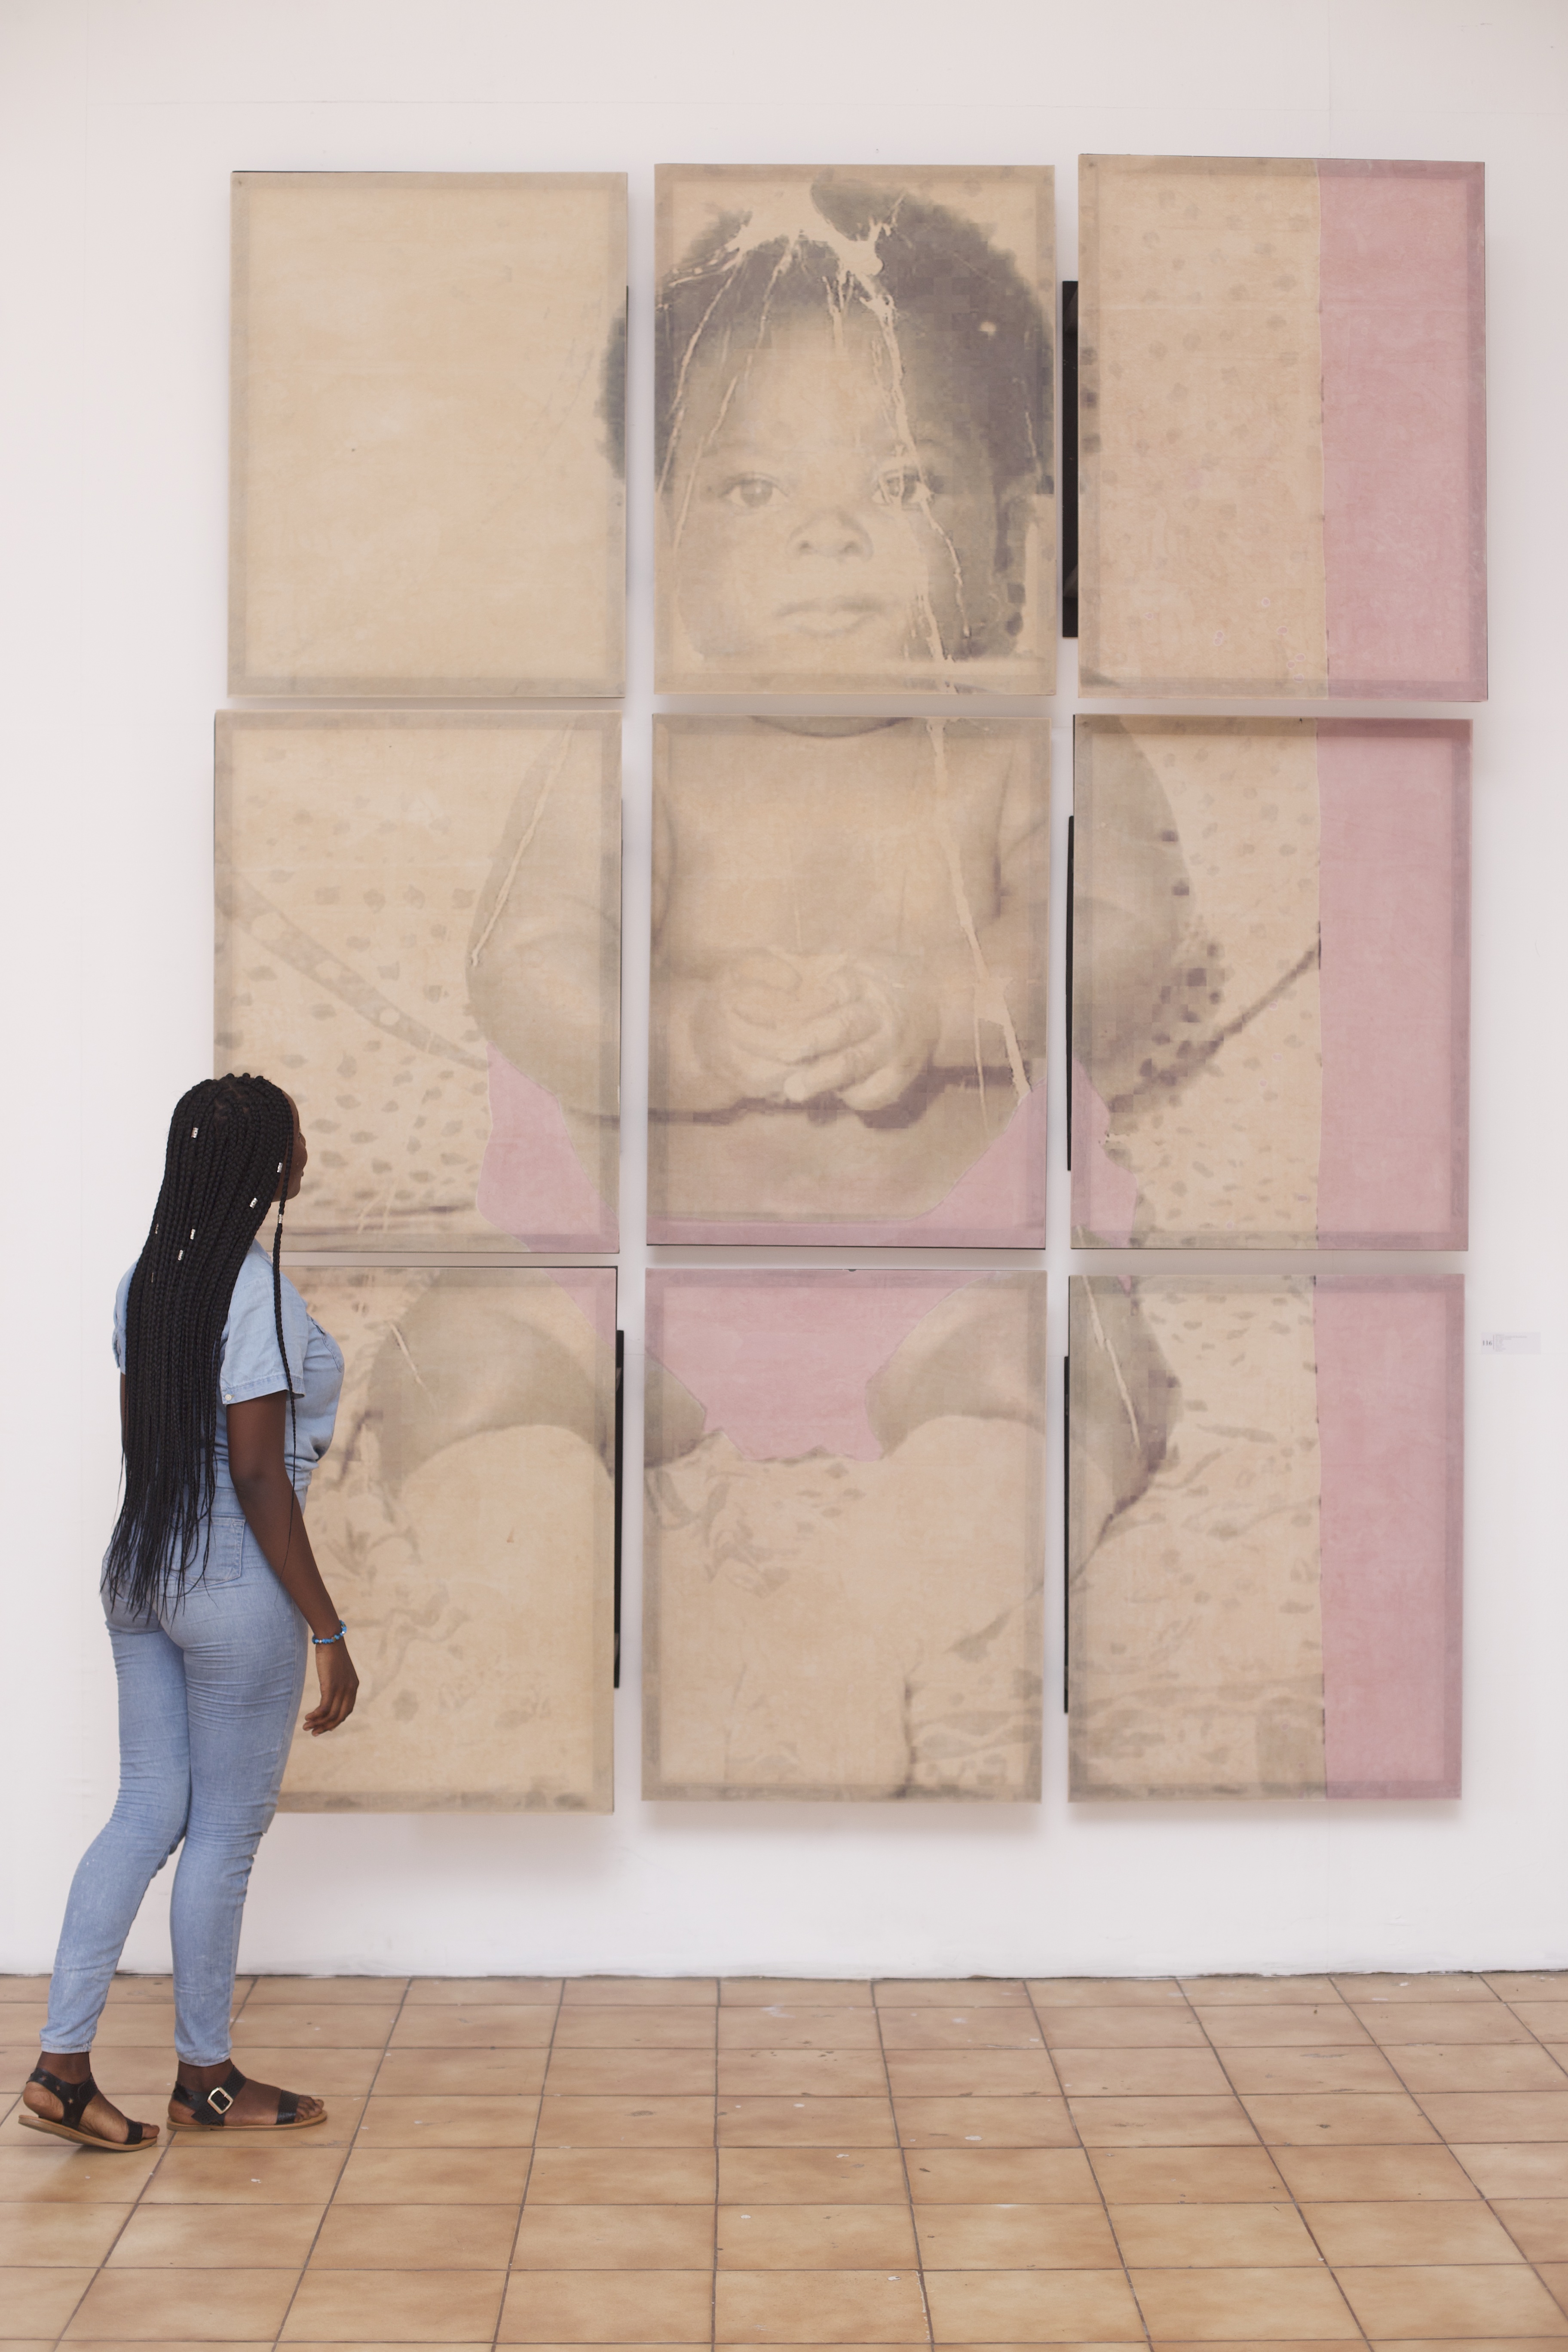 Artistic intervention, by Fredrick Botchway, MFA student of KNUST. Botchway uses archival images in creating giant-sized paintings using a combination of paints and cooking oils